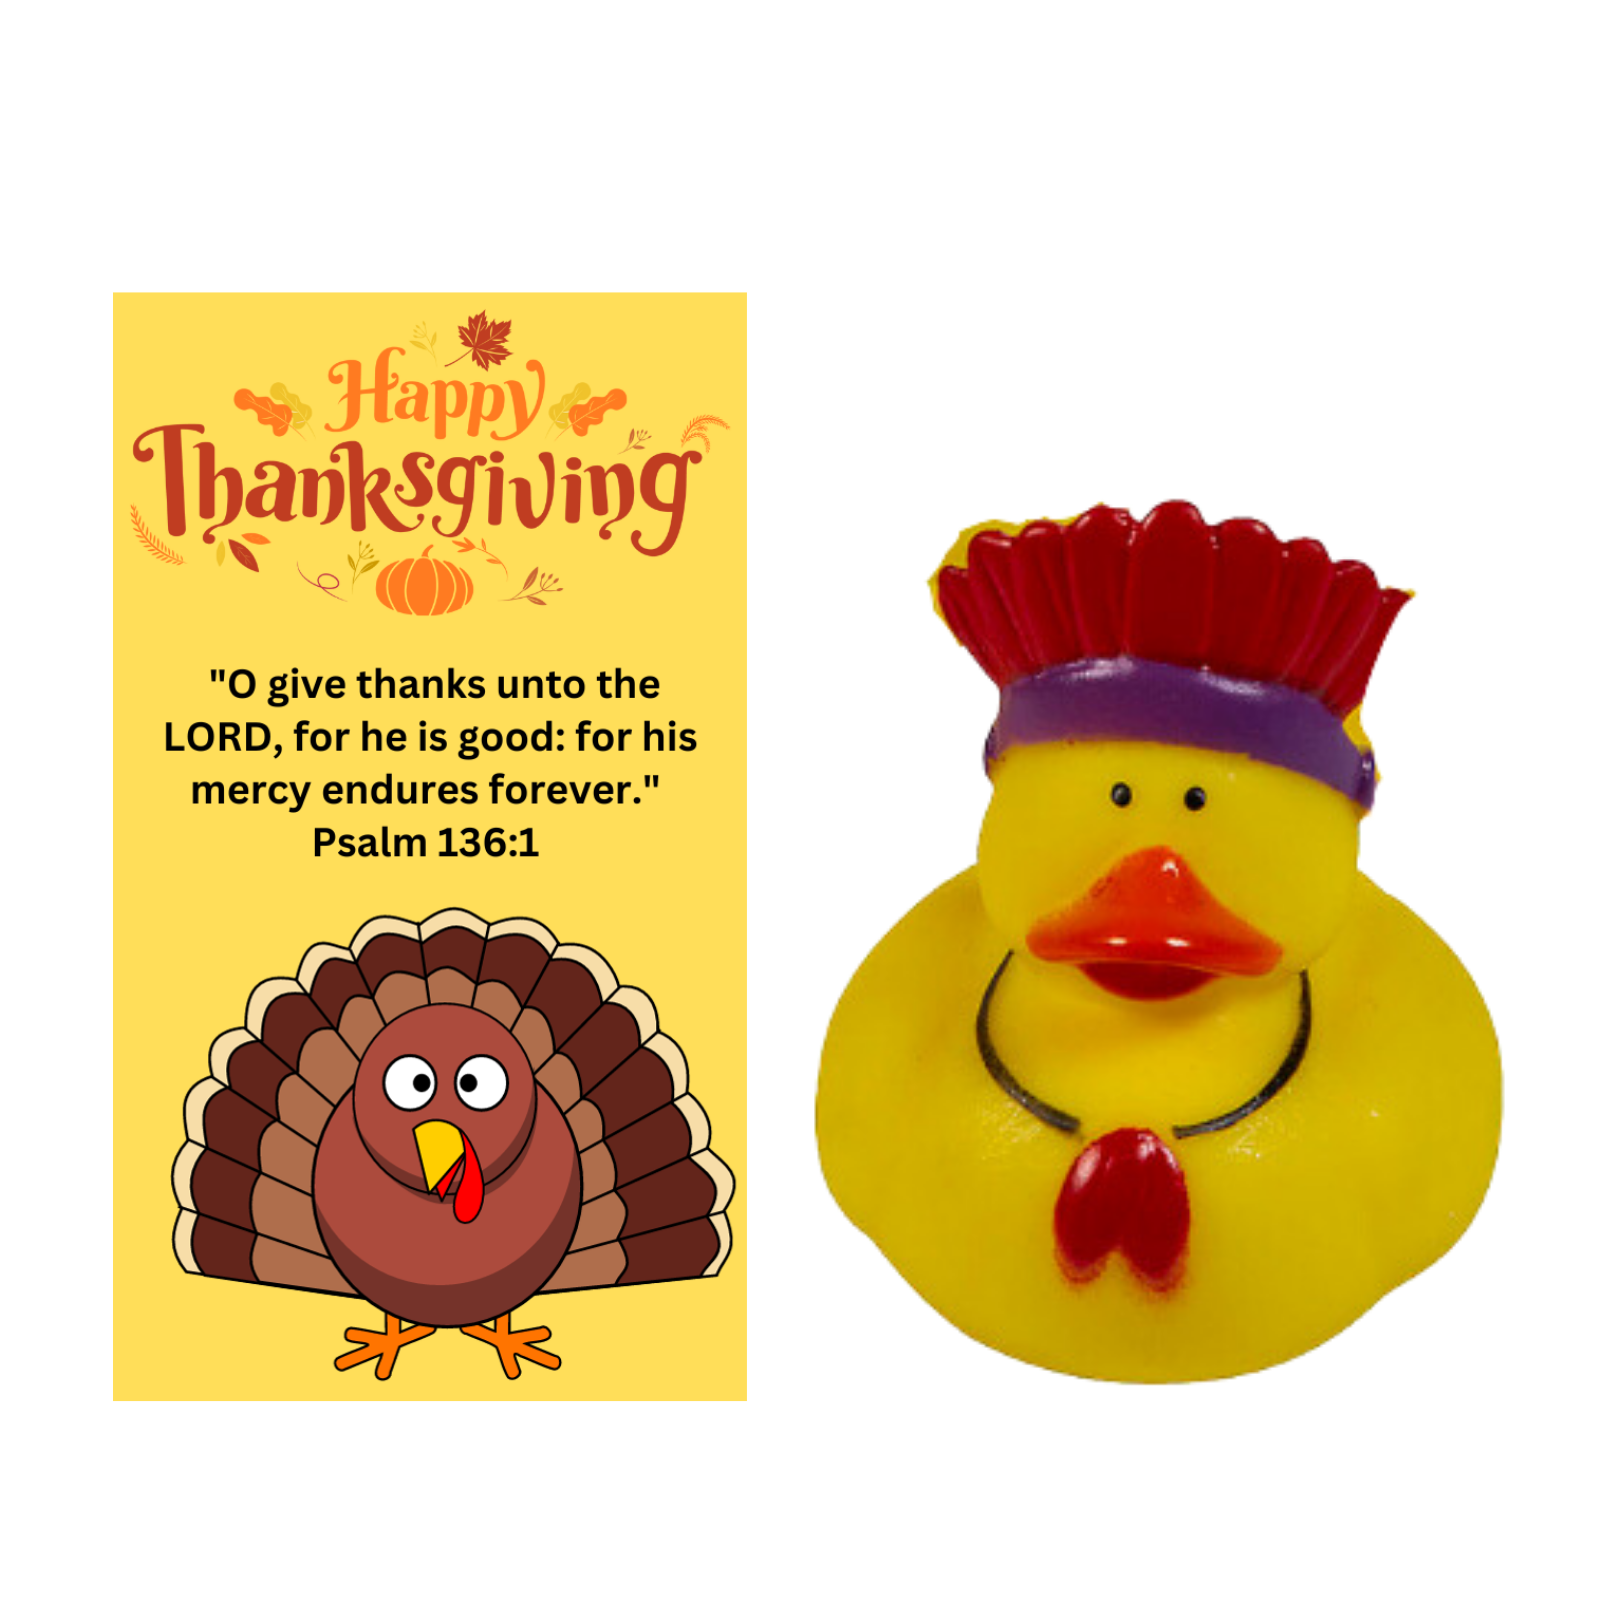 Rubber Turkey Duck - Holiday Themed Rubber Ducks for Sale – DUCKY CITY